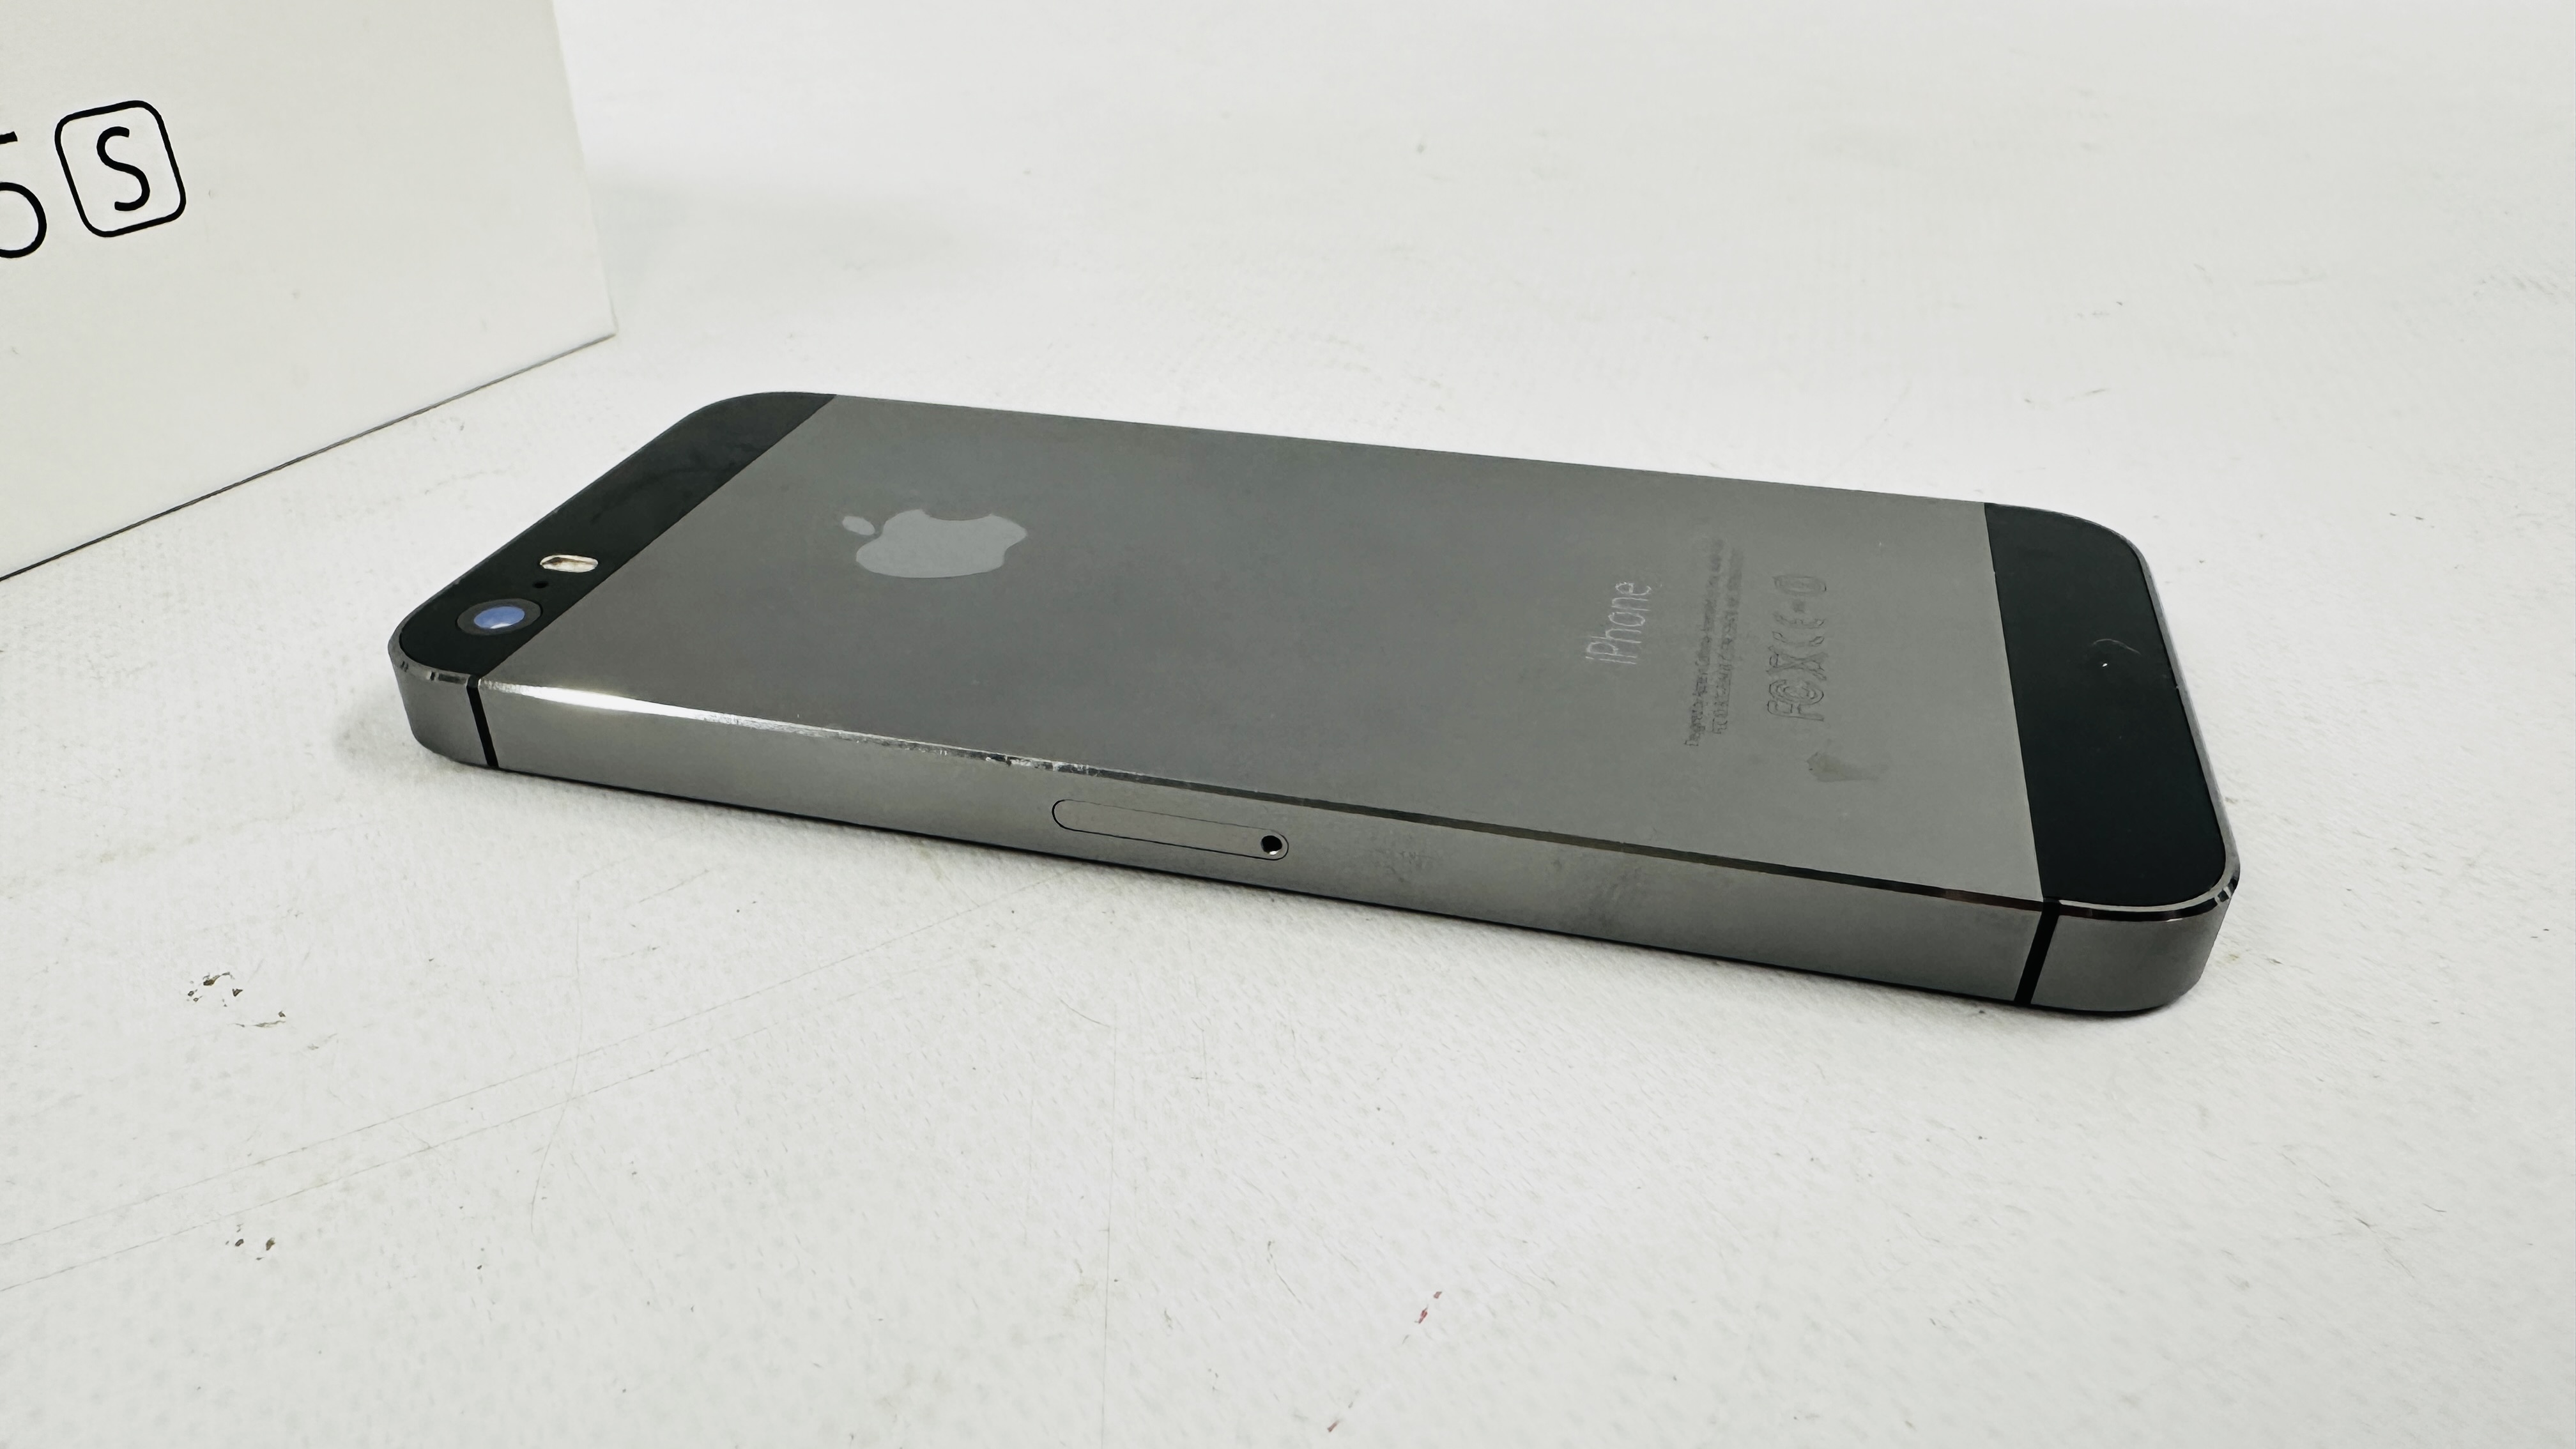 IPHONE 5 16GB IMEI 359138071732571 AND MEDION "LIFETAB" TABLET - SOLD AS SEEN. - Image 4 of 10